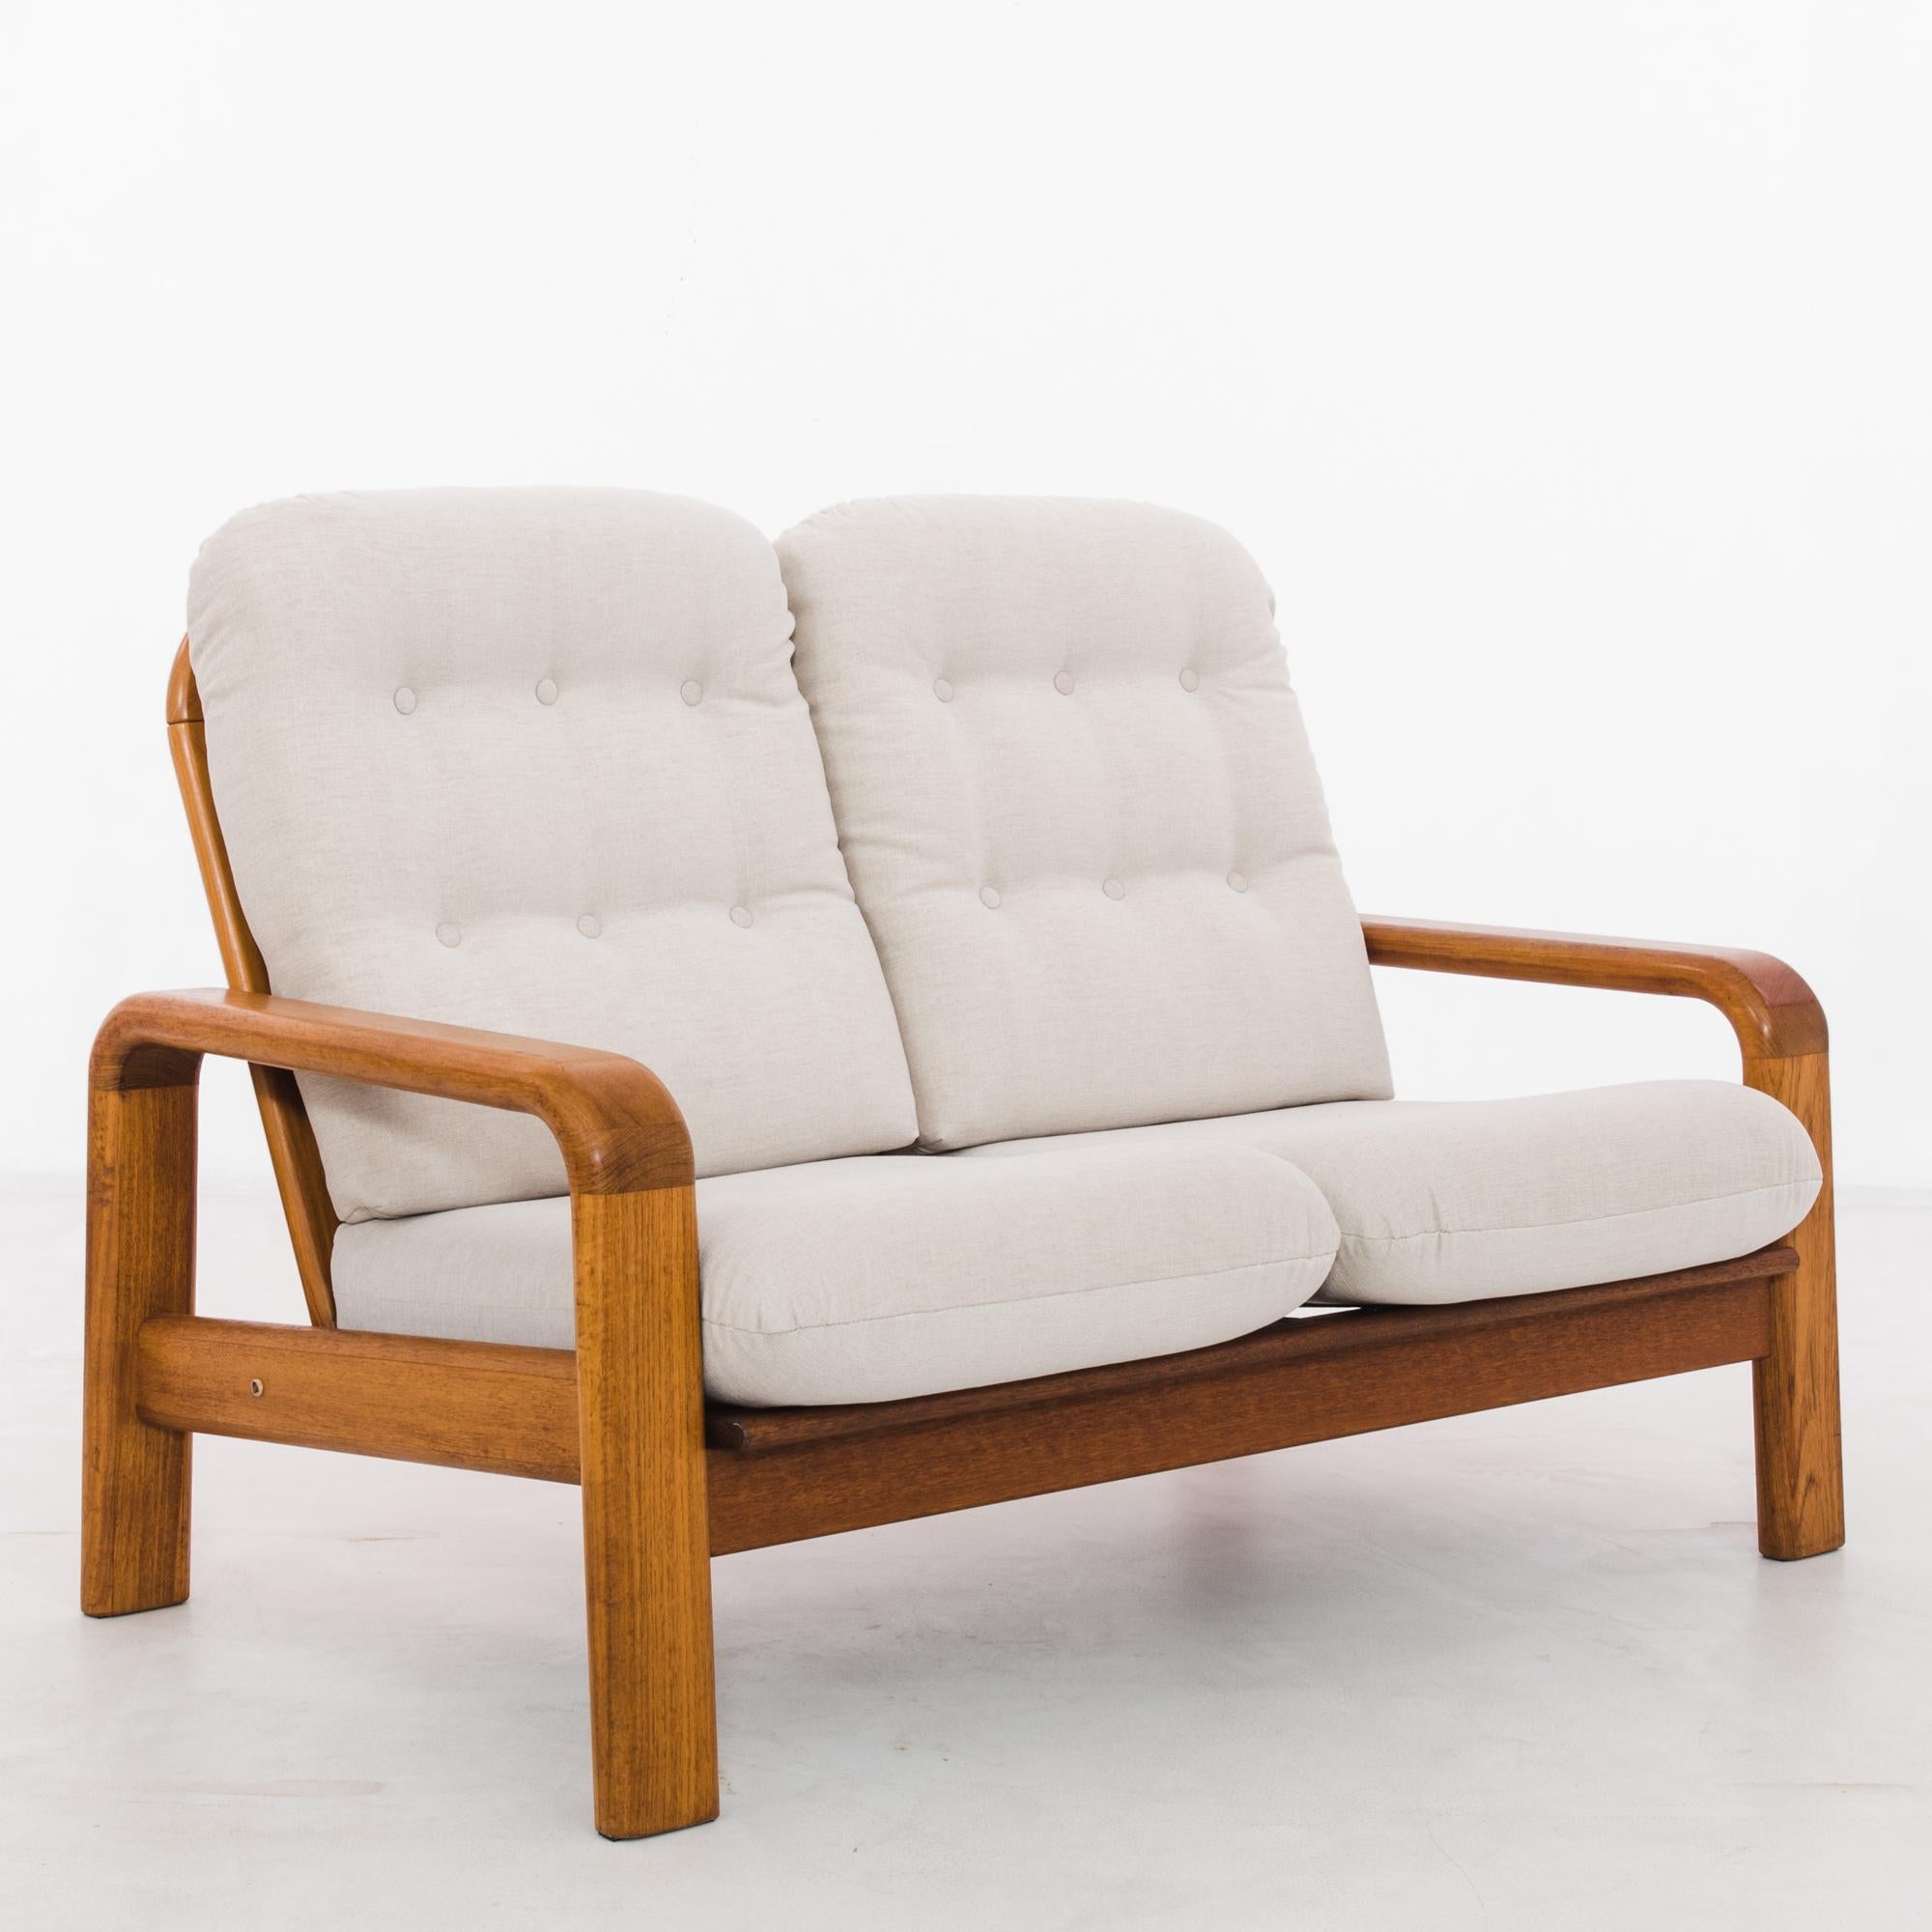 During the illustrious epoch of 1960s Danish design, this teak upholstered sofa emerged as a quintessential emblem of Scandinavian elegance. Fashioned from exquisite teak wood, the sofa's frame exudes warmth and richness, boasting a mesmerizing